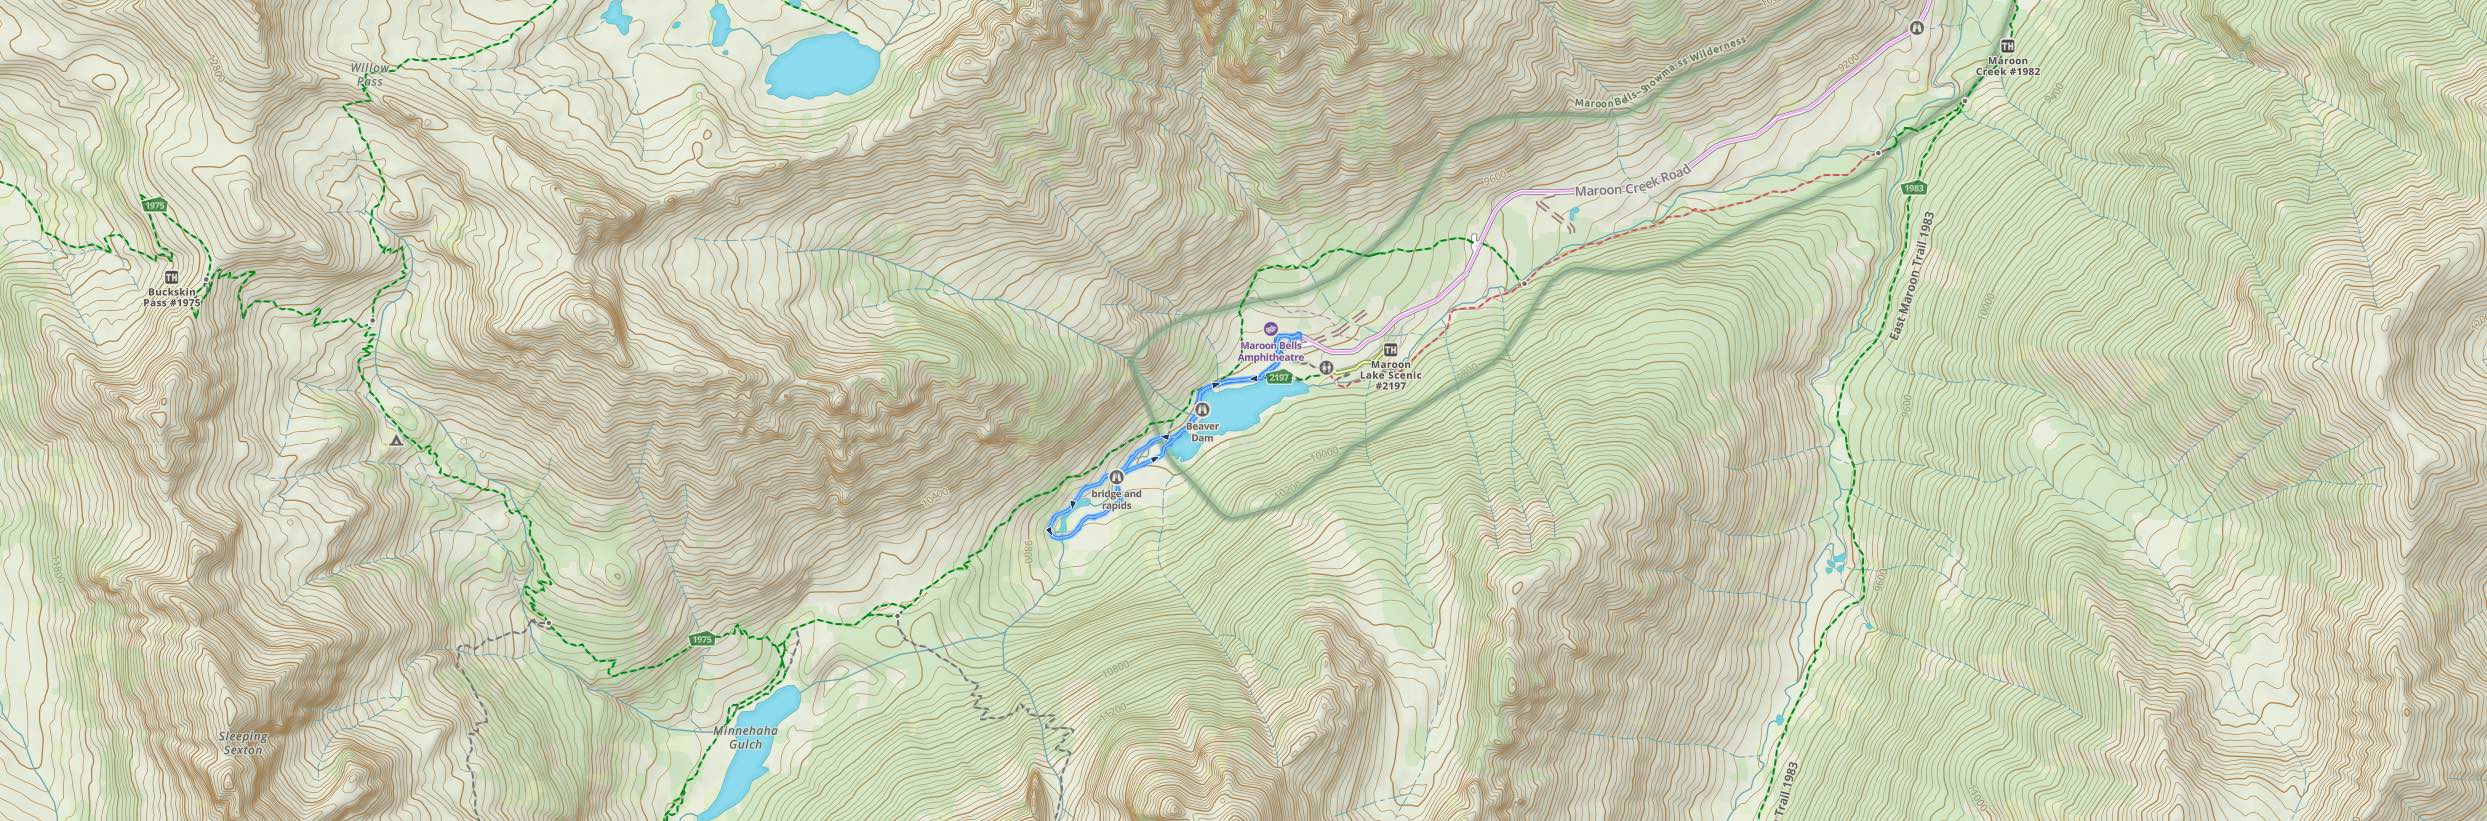 This image is of the topography map of the Maroon Bells in Aspen, Colorado.